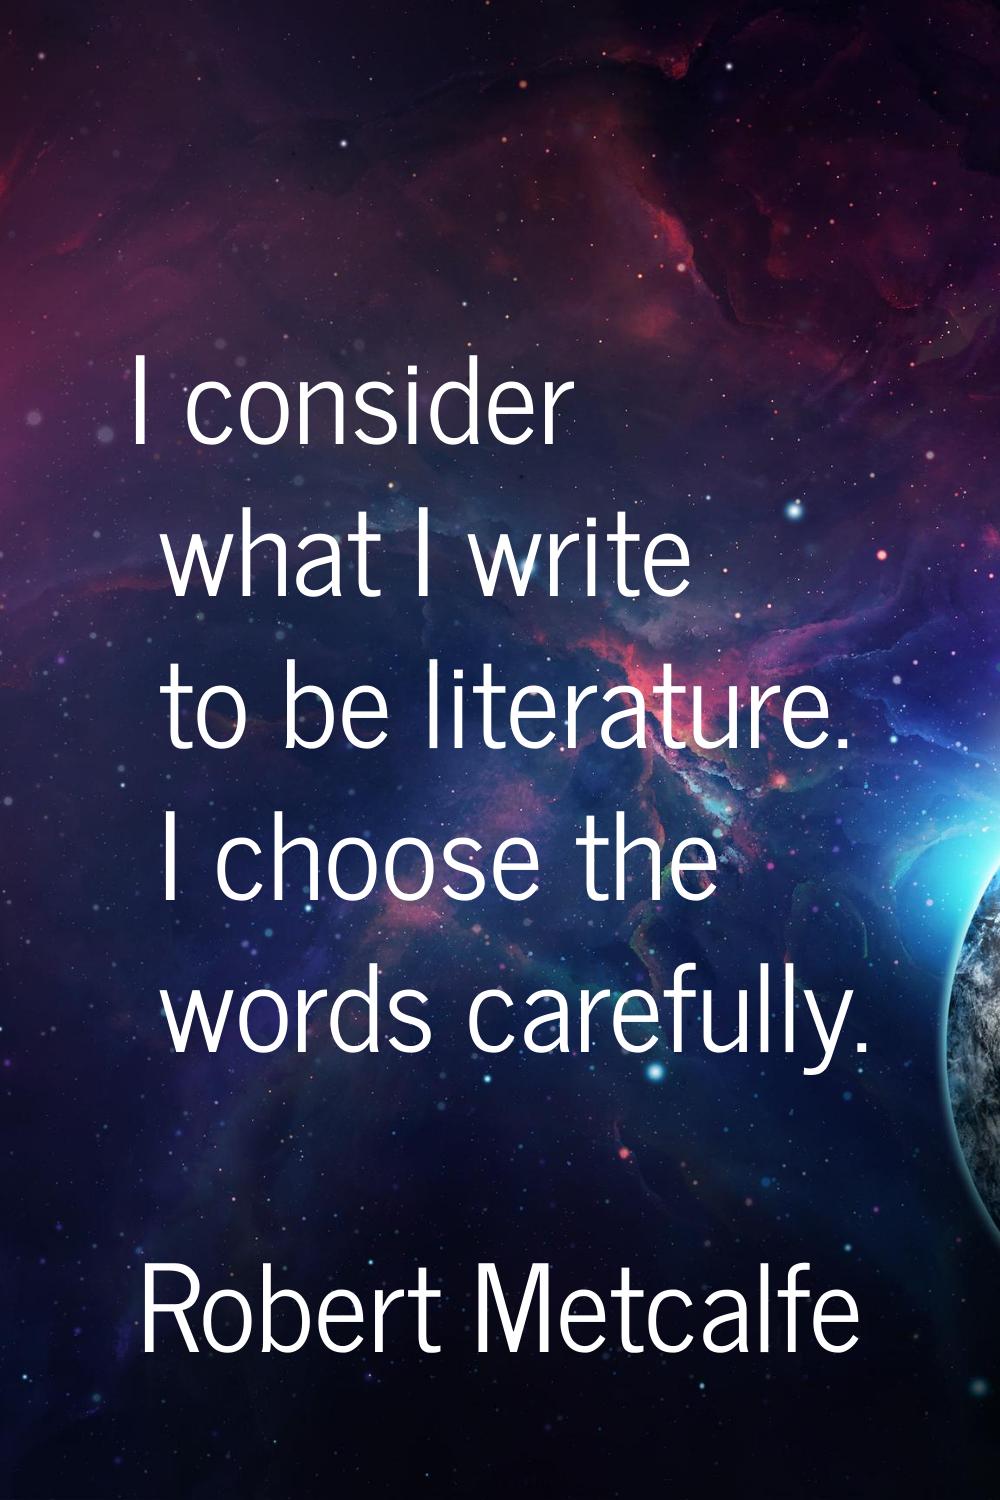 I consider what I write to be literature. I choose the words carefully.